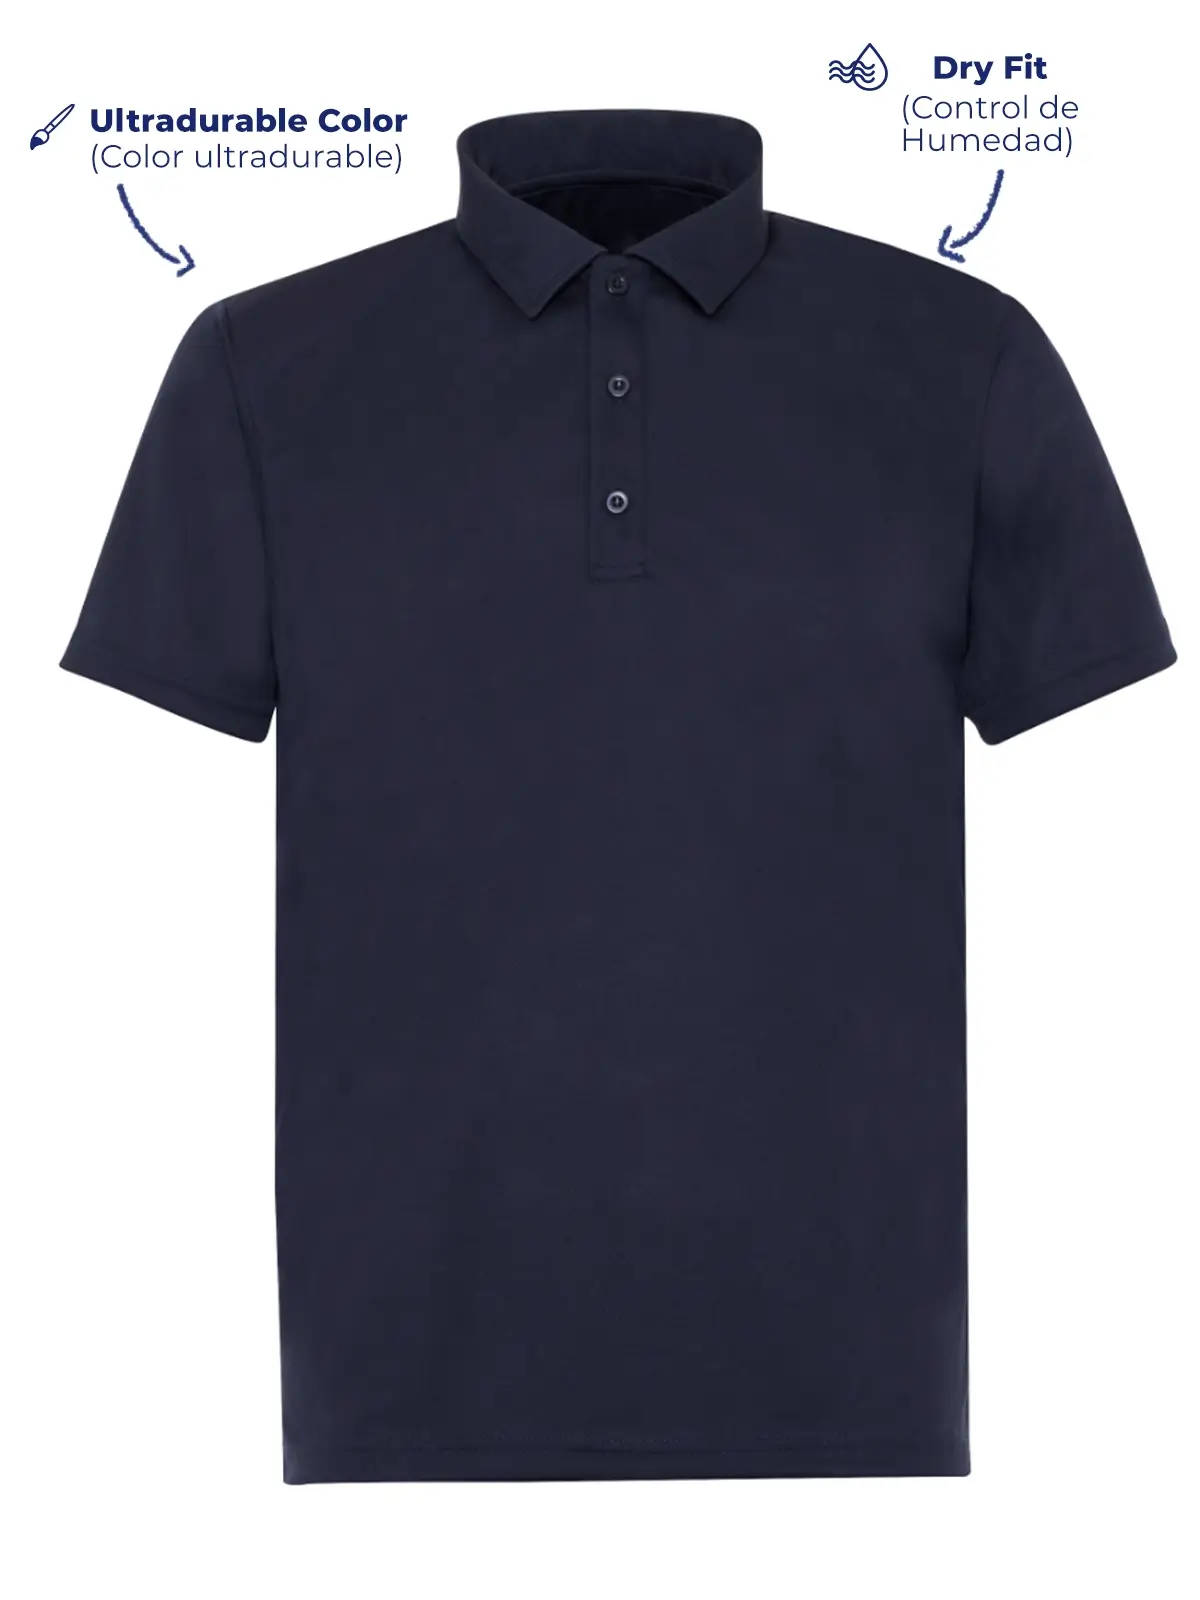 Men's Dry fit P 900 navy blue polo shirt front view